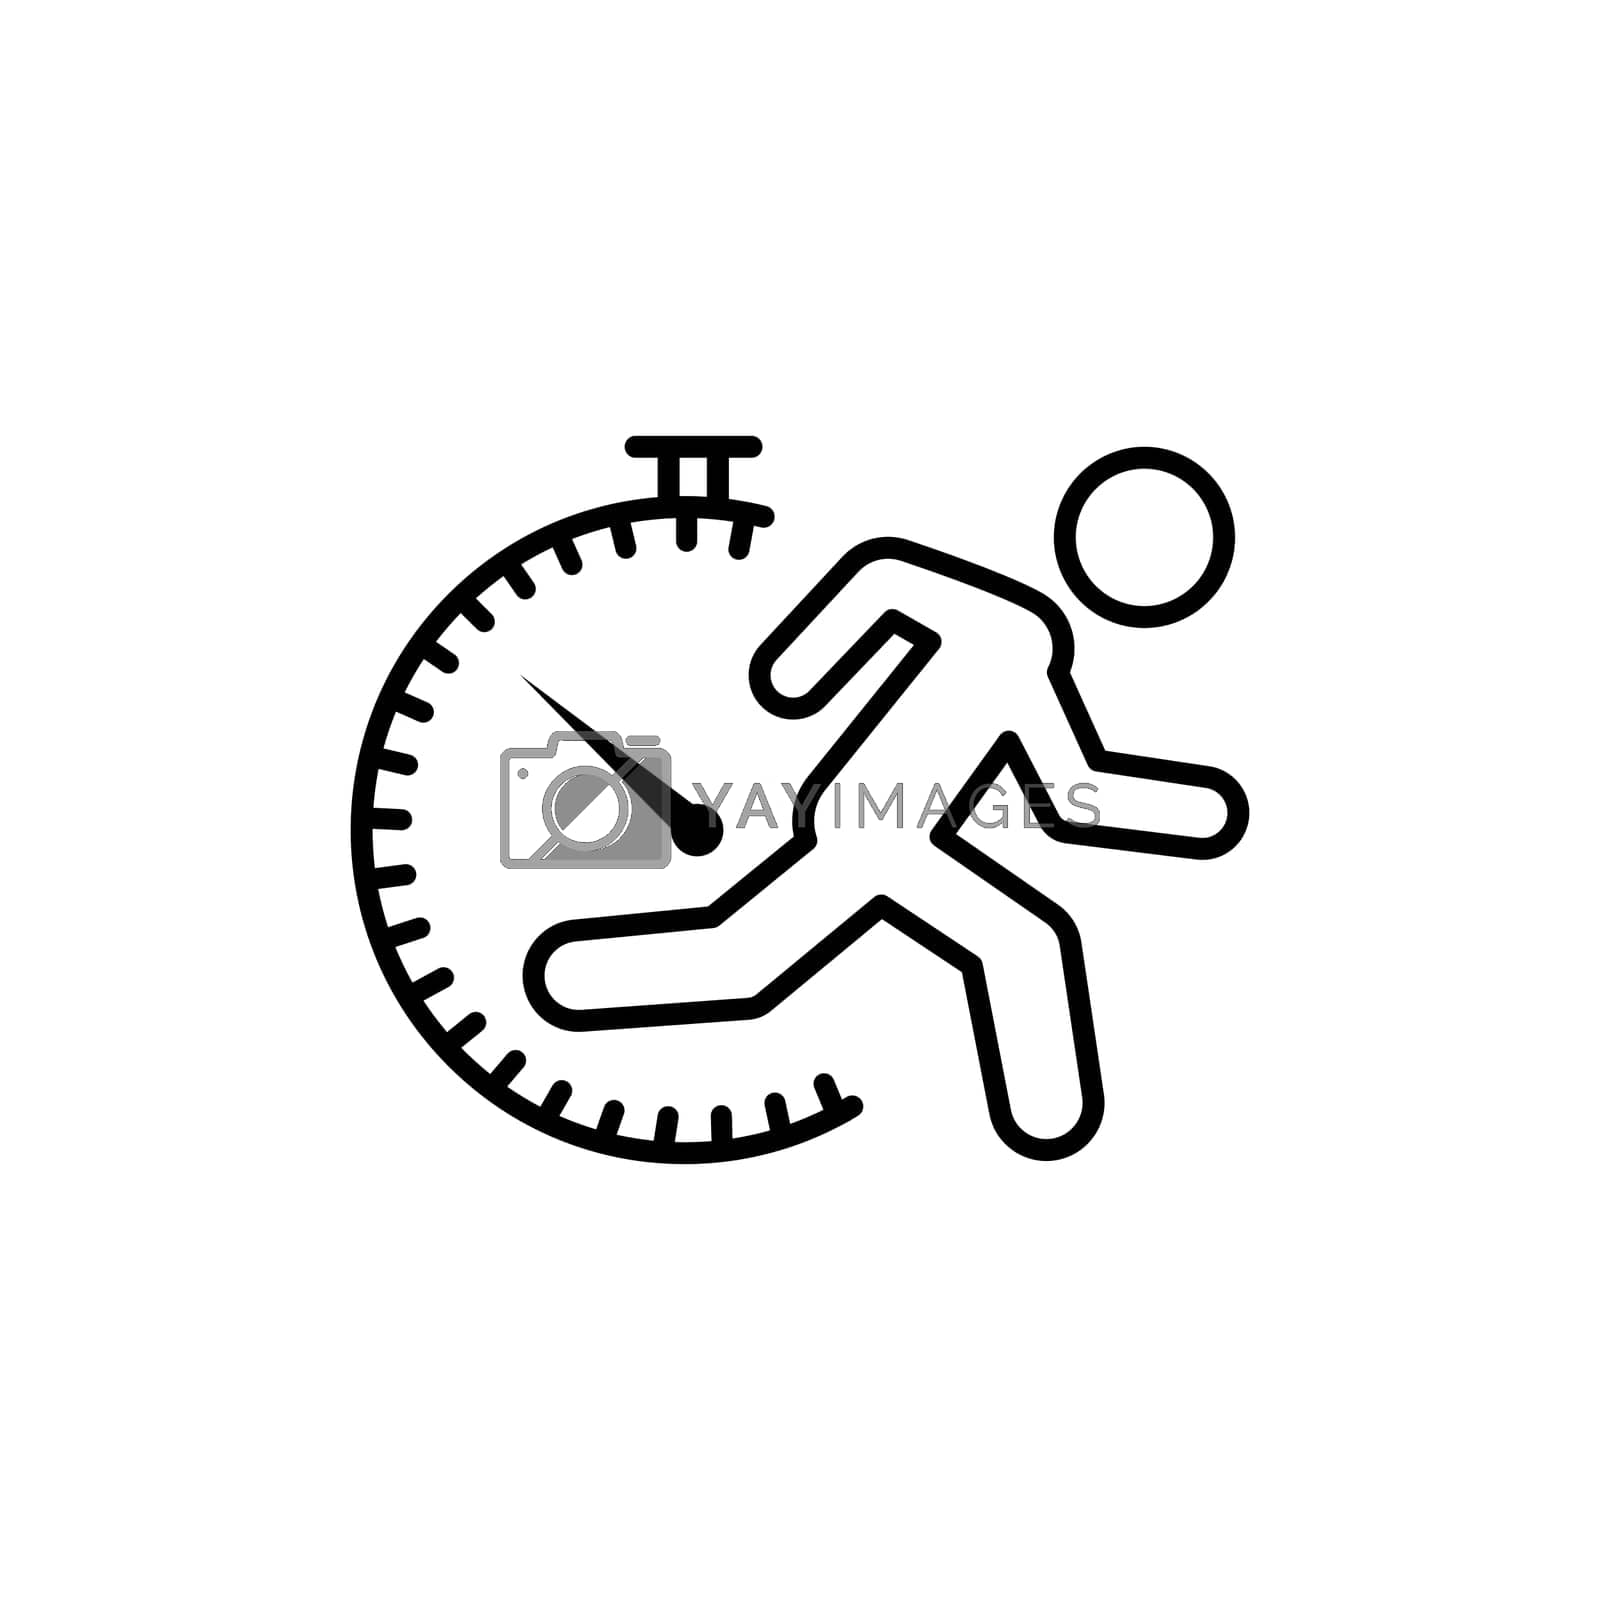 Royalty free image of Thin line fast running man icon on white background by Olgaufu